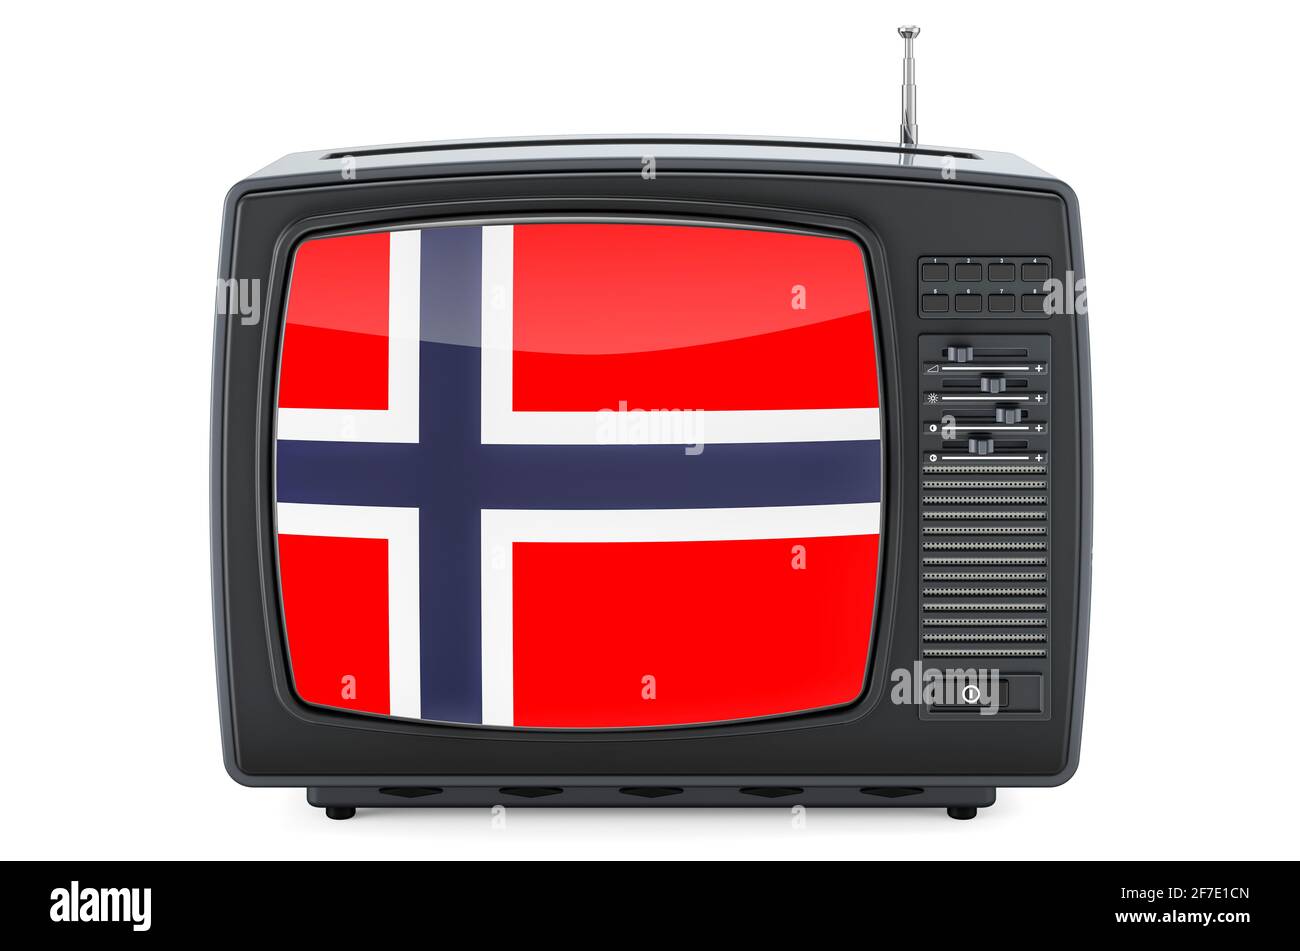 Norwegian Television concept. TV set with flag of Norway. 3D rendering isolated on white background Stock Photo